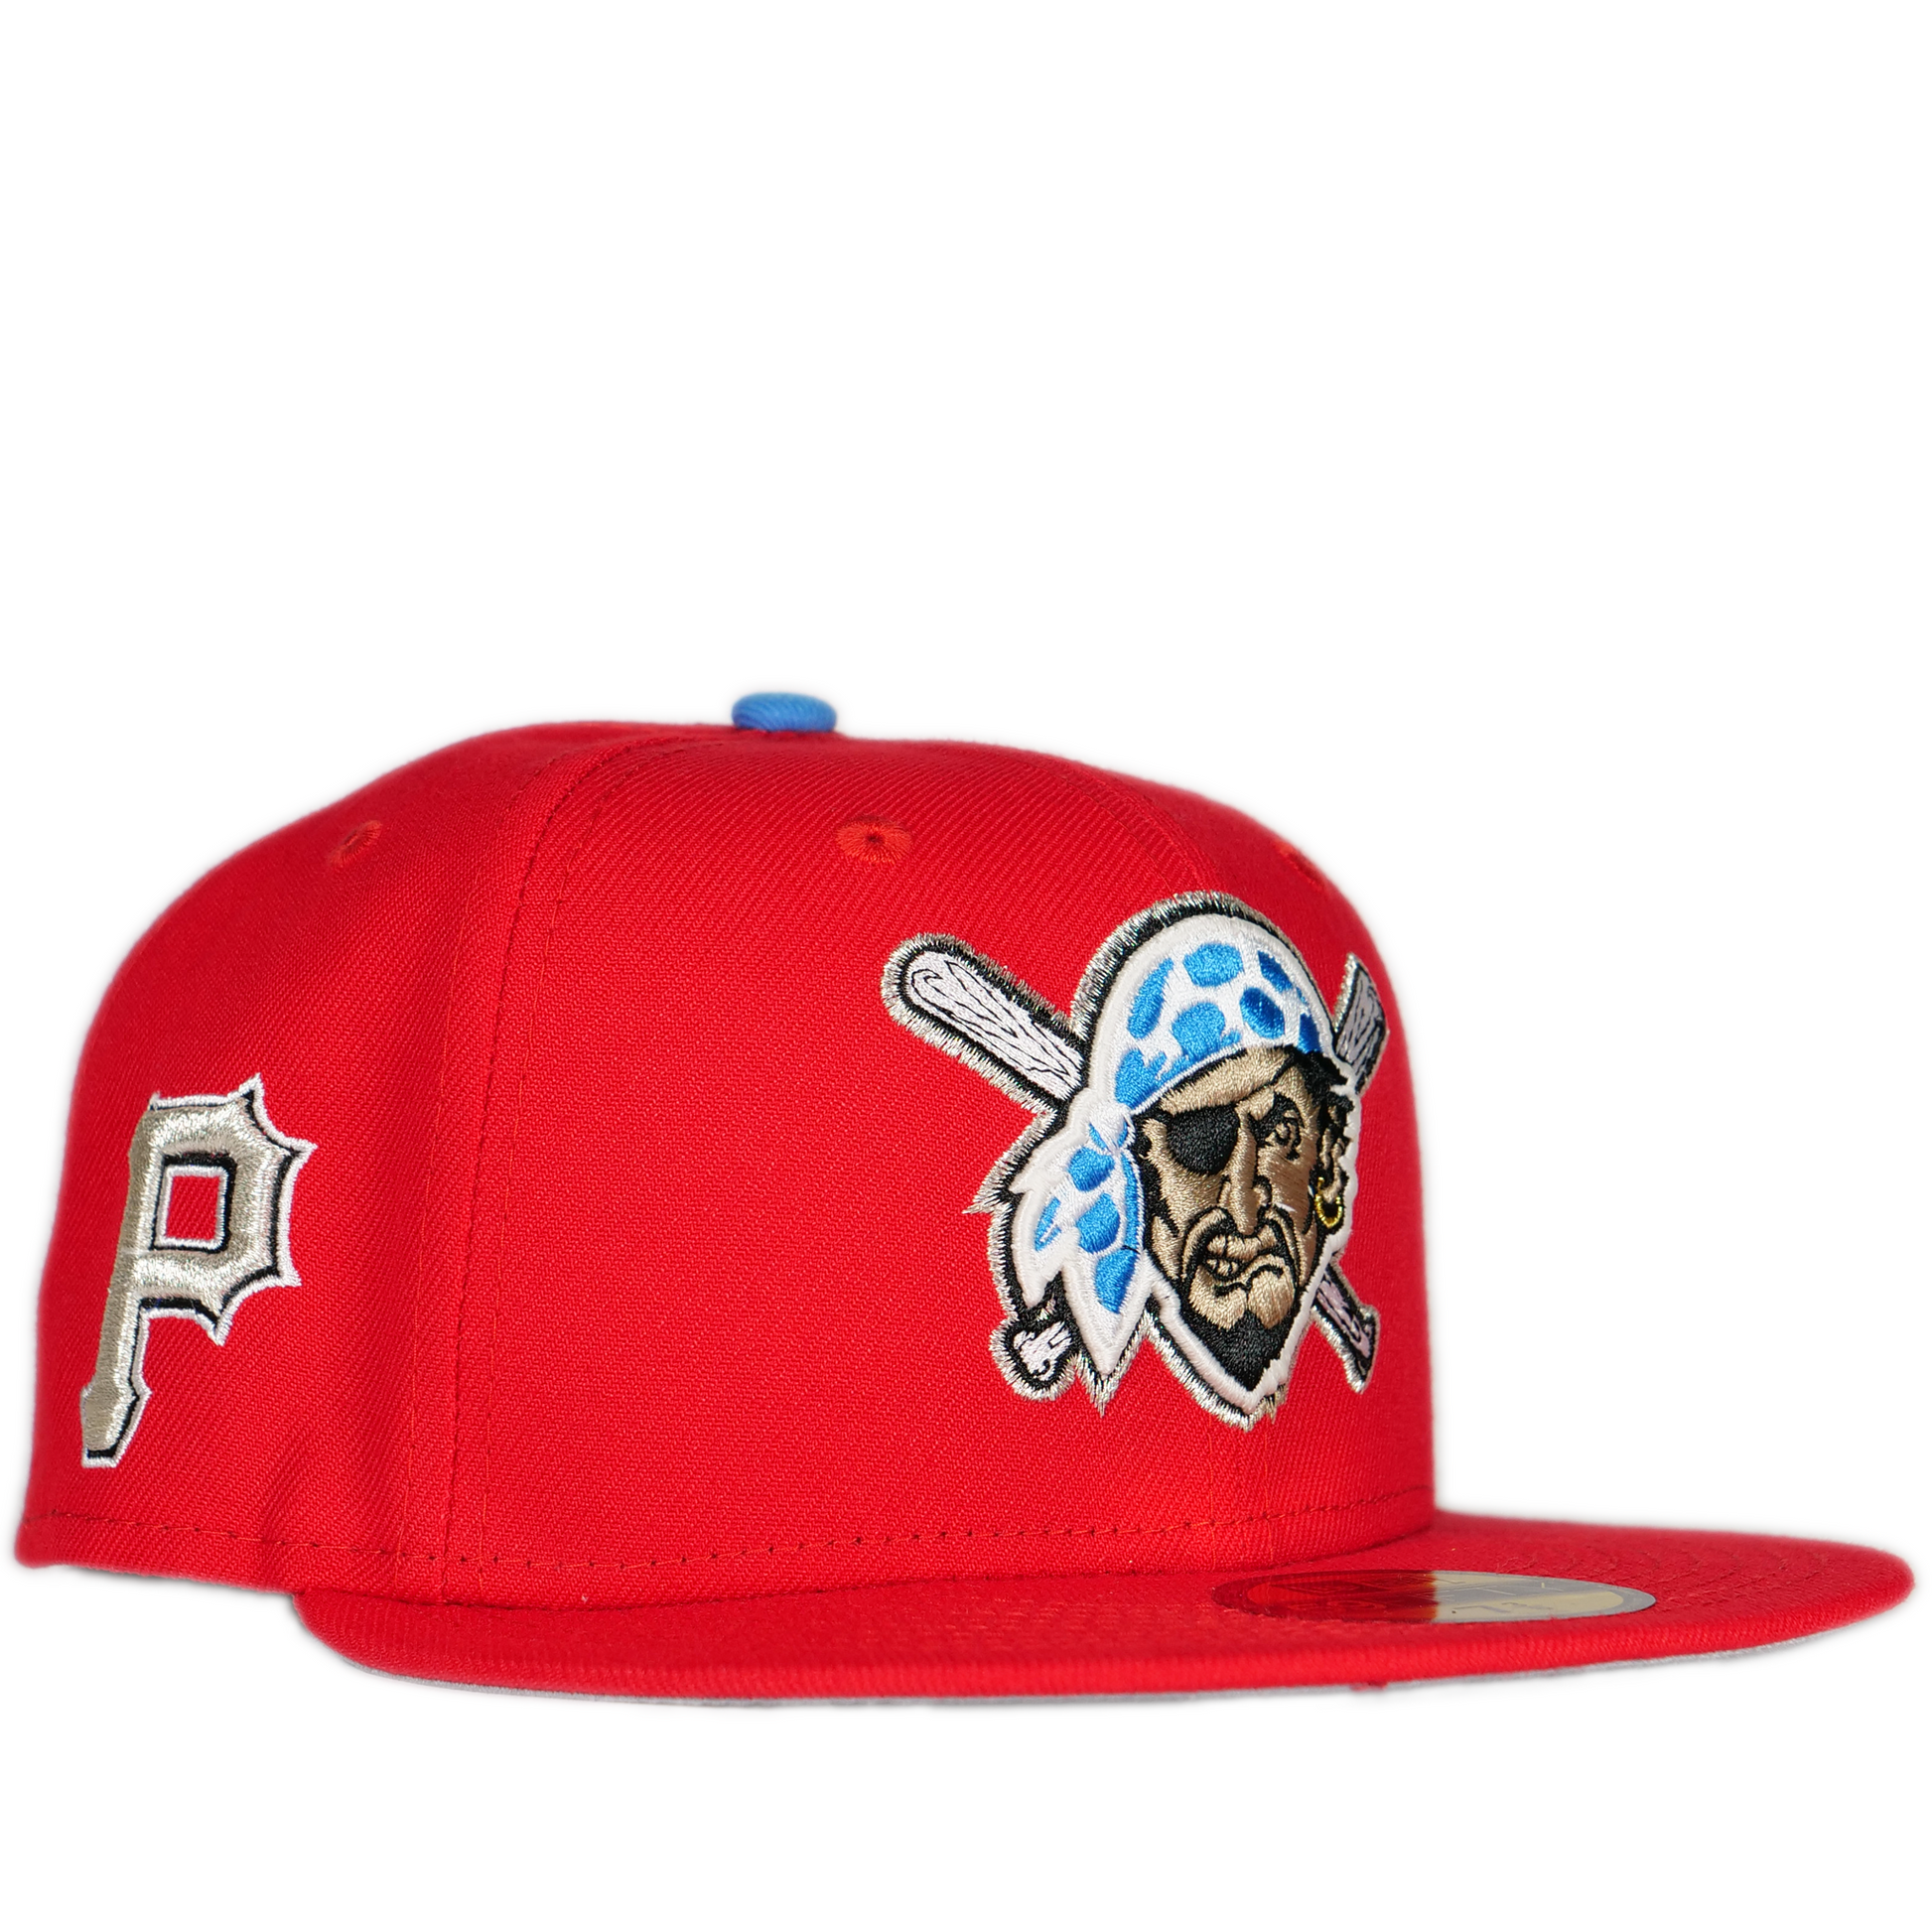 New Era Pittsburgh Pirates 59FIFTY Fitted Hat - Red/ Blue/ Grey 7